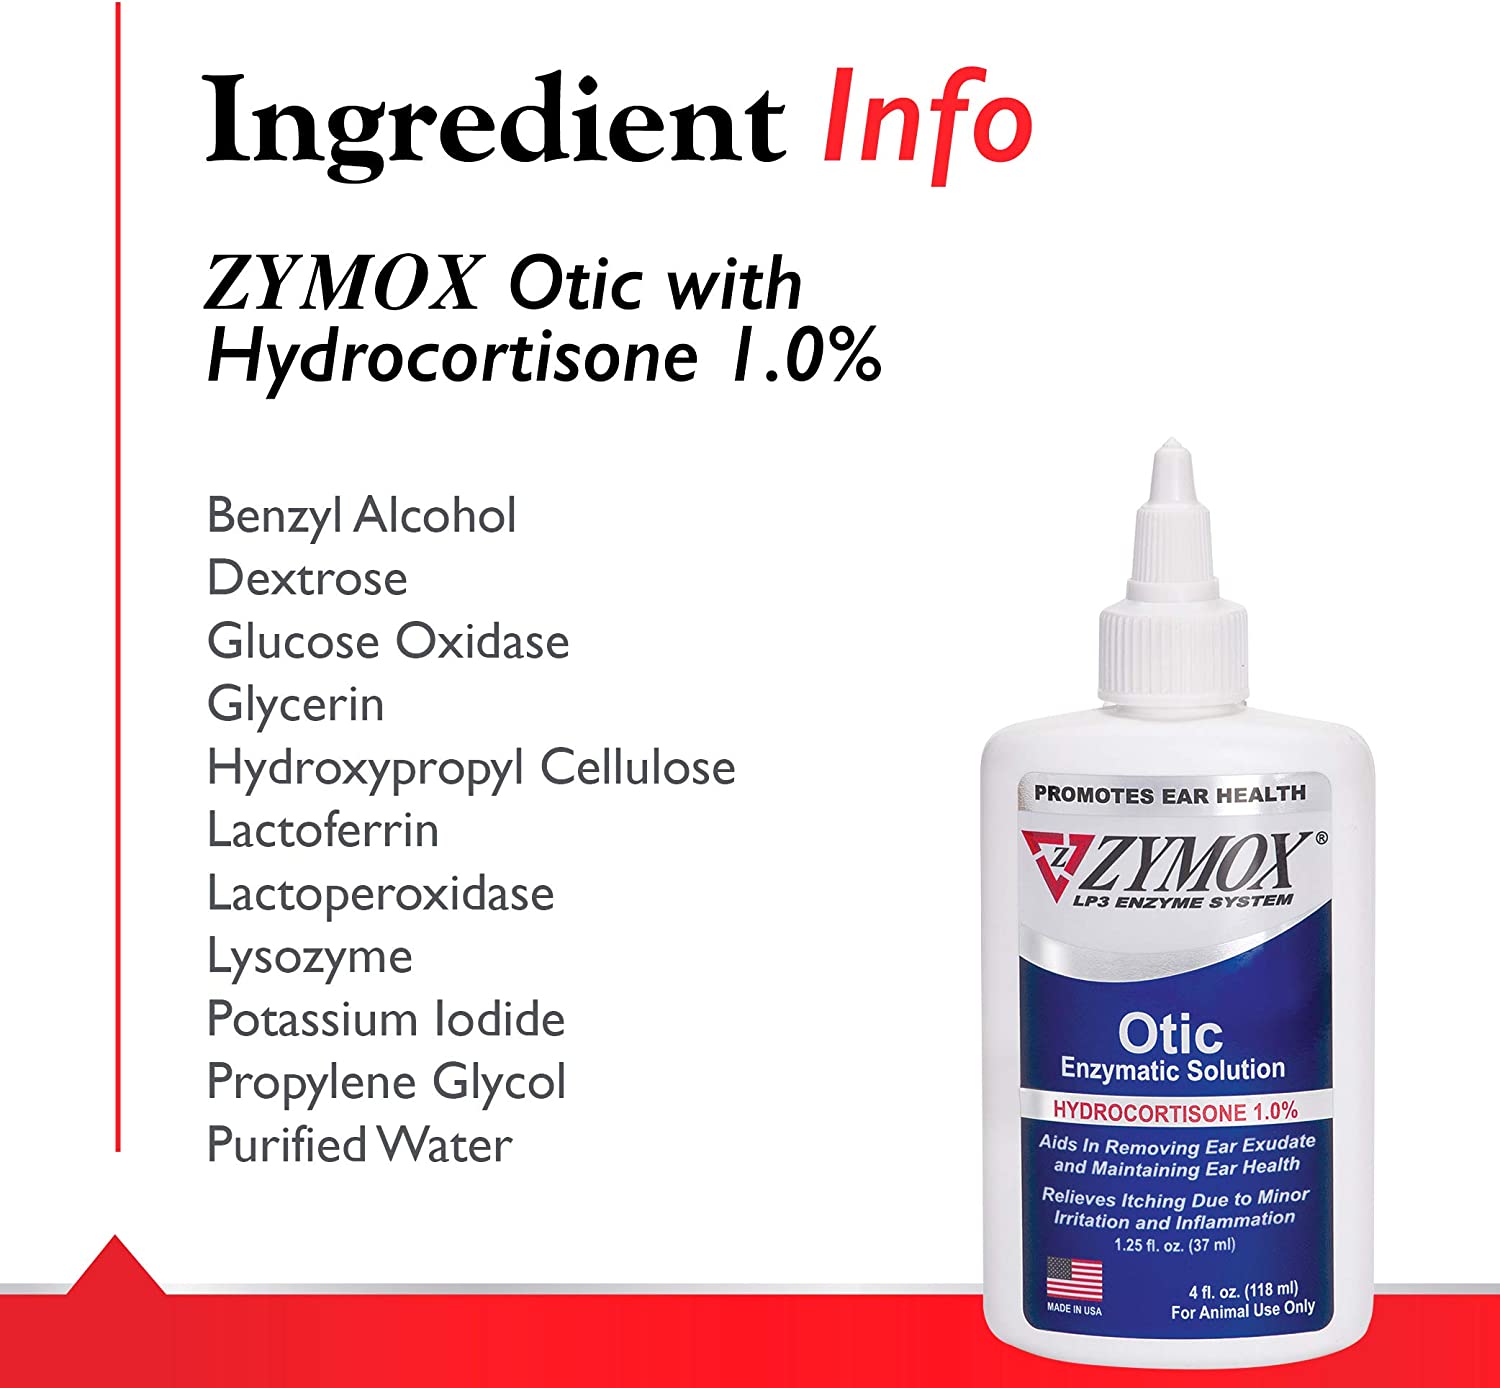 Zymox Otic Enzymatic Solution for Dogs and Cats to Soothe Ear Infections with 1% Hydrocortisone for Itch Relief 4oz parallel imported goods 